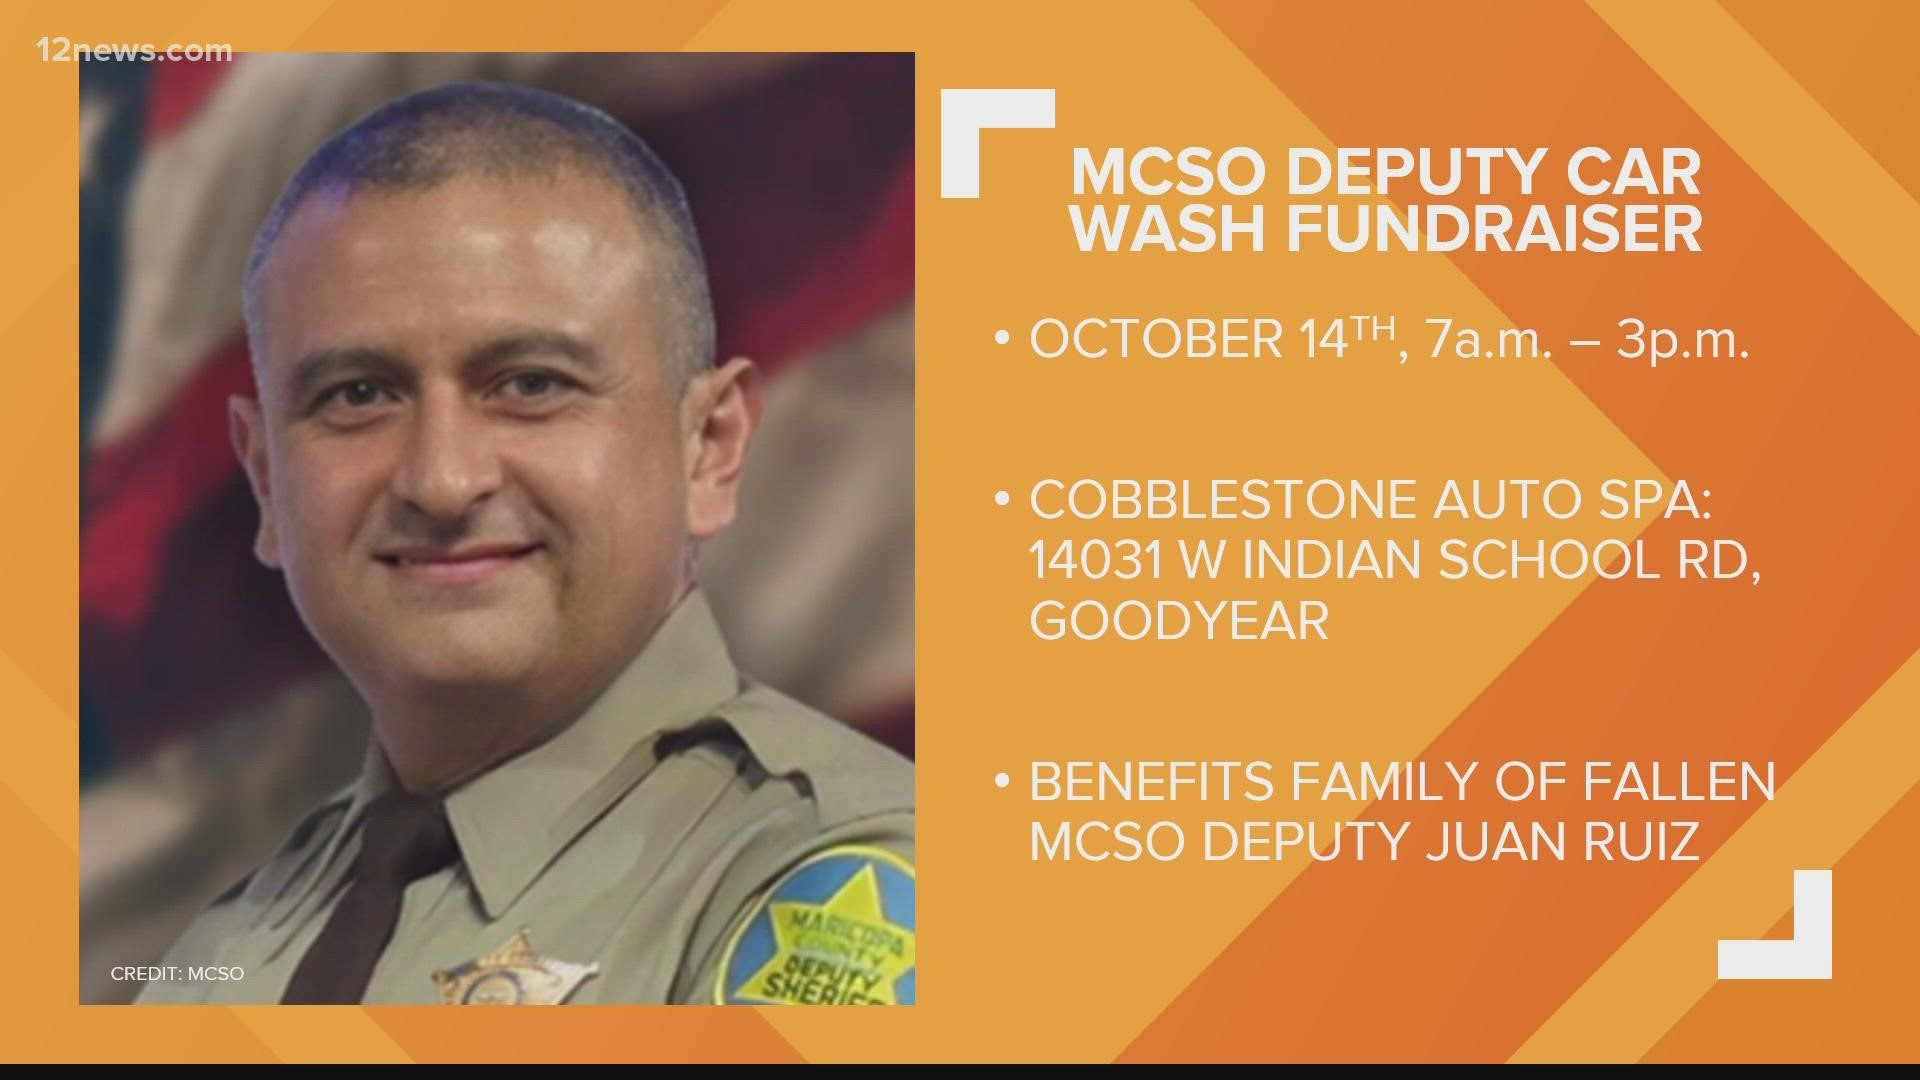 Cobblestone Auto Spa is working with the Maricopa County Sheriff's Office Memorial Fund to gather donations to support the family of the deputy who recently died.